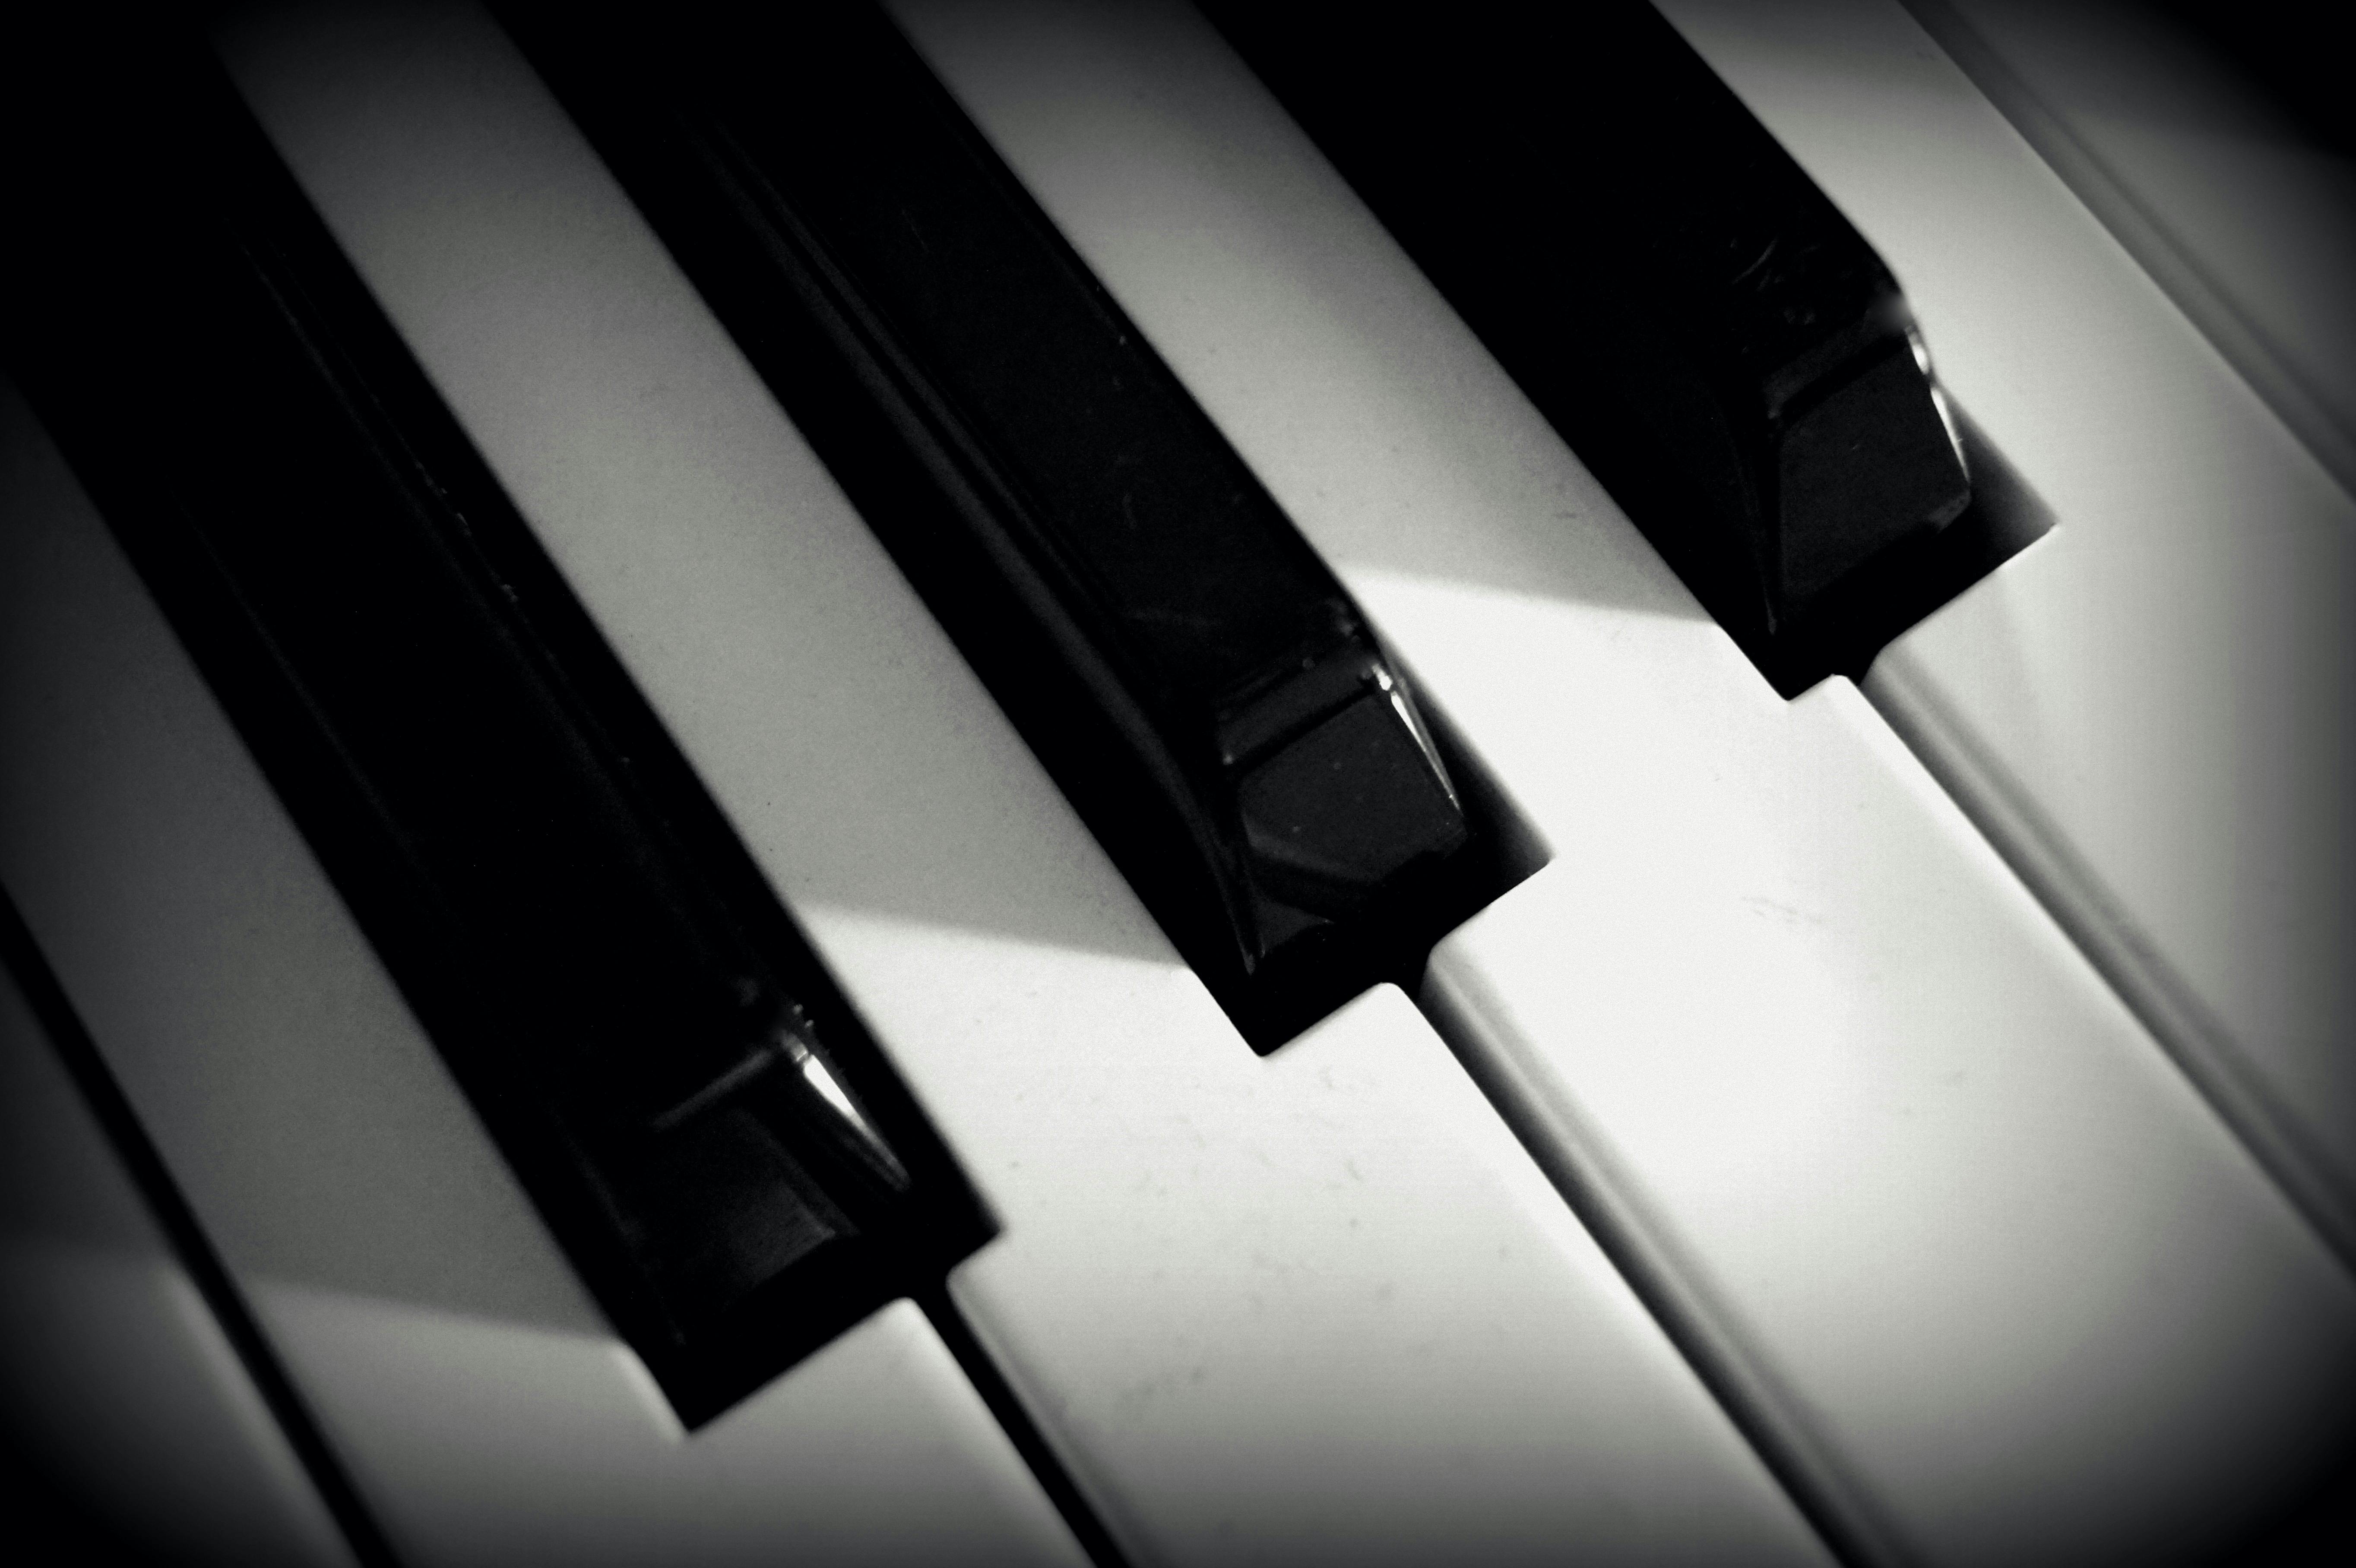 piano difficulty going between black and white keys